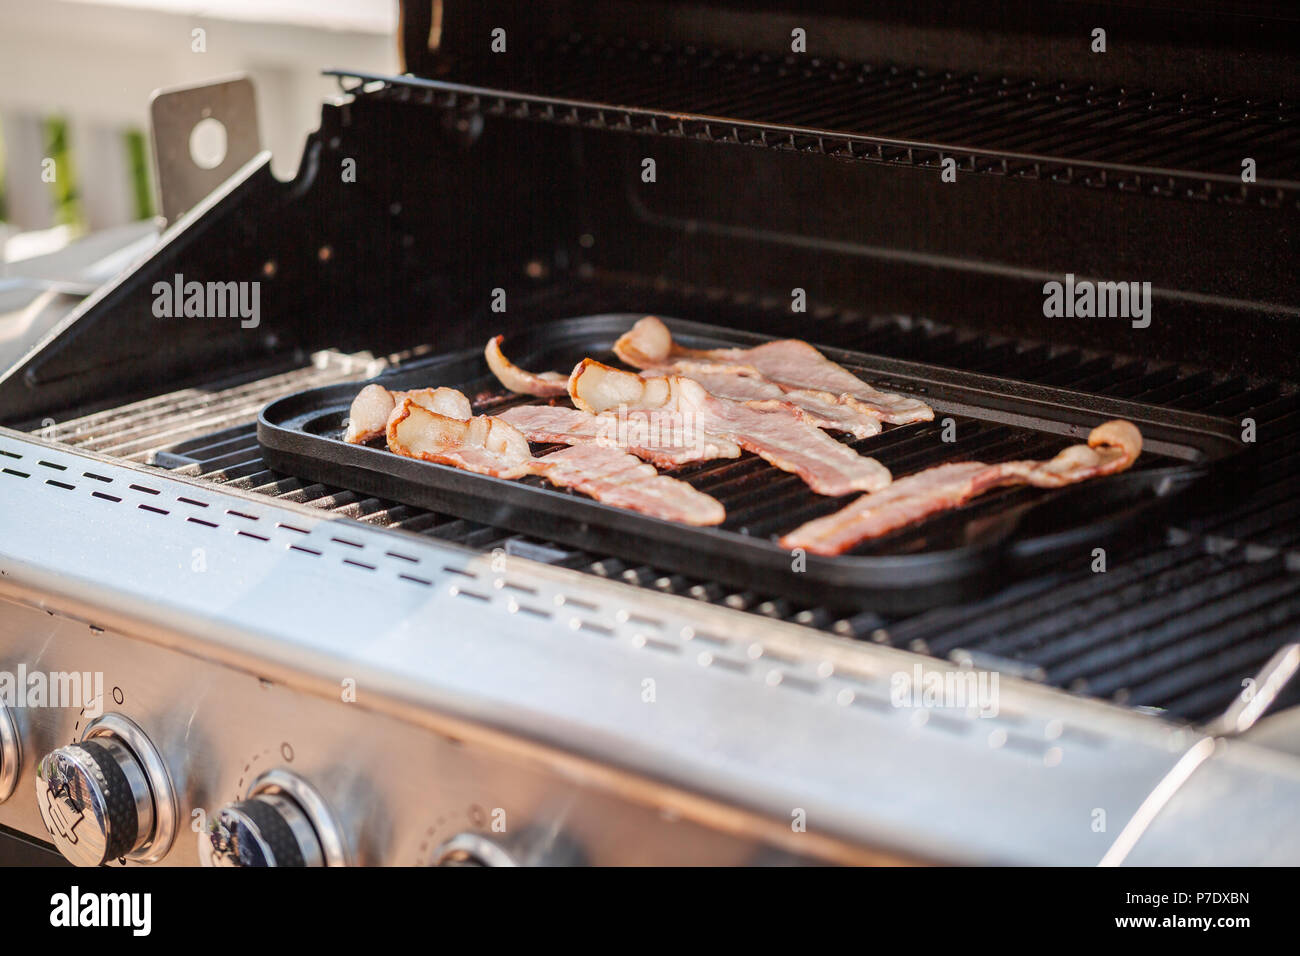 https://c8.alamy.com/comp/P7DXBN/grilling-bacon-strips-on-cast-iron-griddle-in-outdoor-gas-grill-P7DXBN.jpg